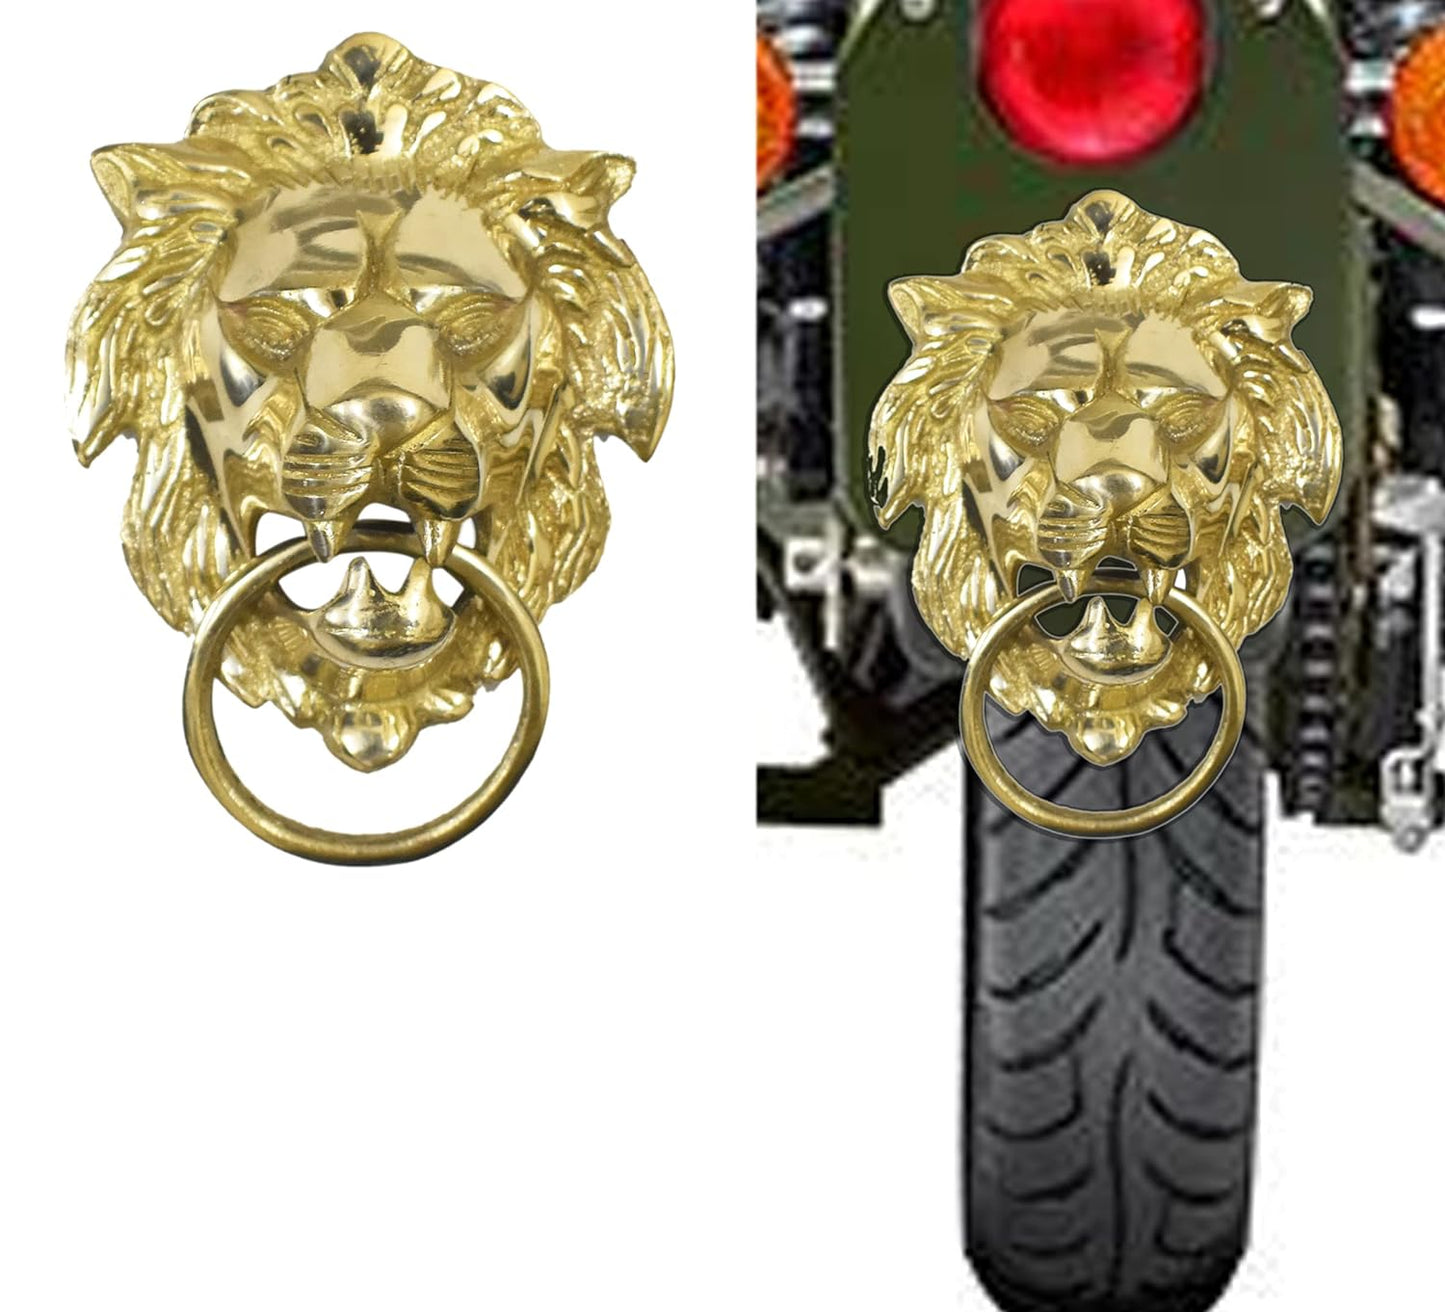 BRASS LION XL FOR REAR NUMBER PLATE , FRONT MUDGUARD , AND DECORATIVE IN HOUSE